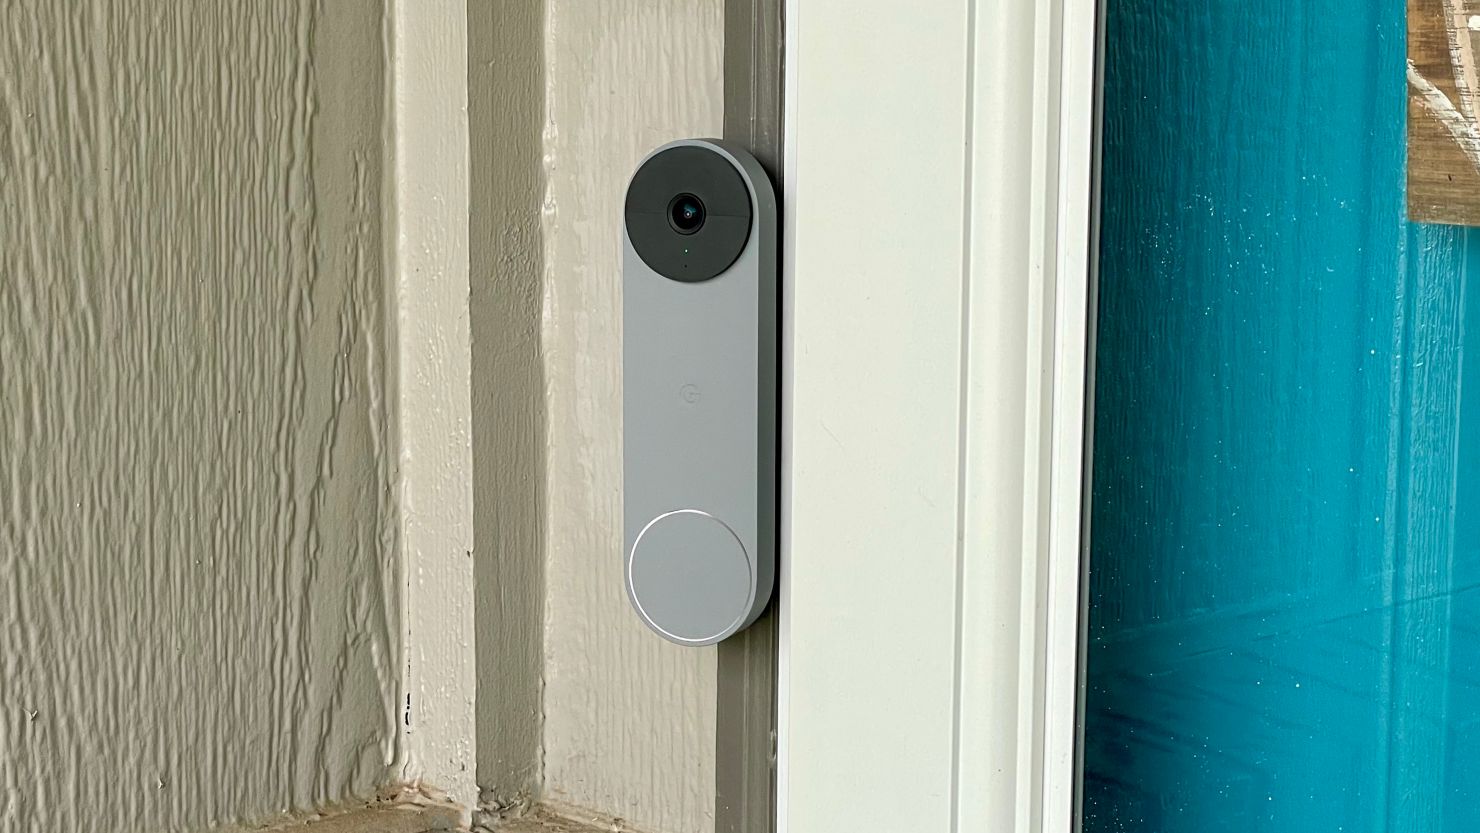 New from Google Nest: The latest Cams and Doorbells are here